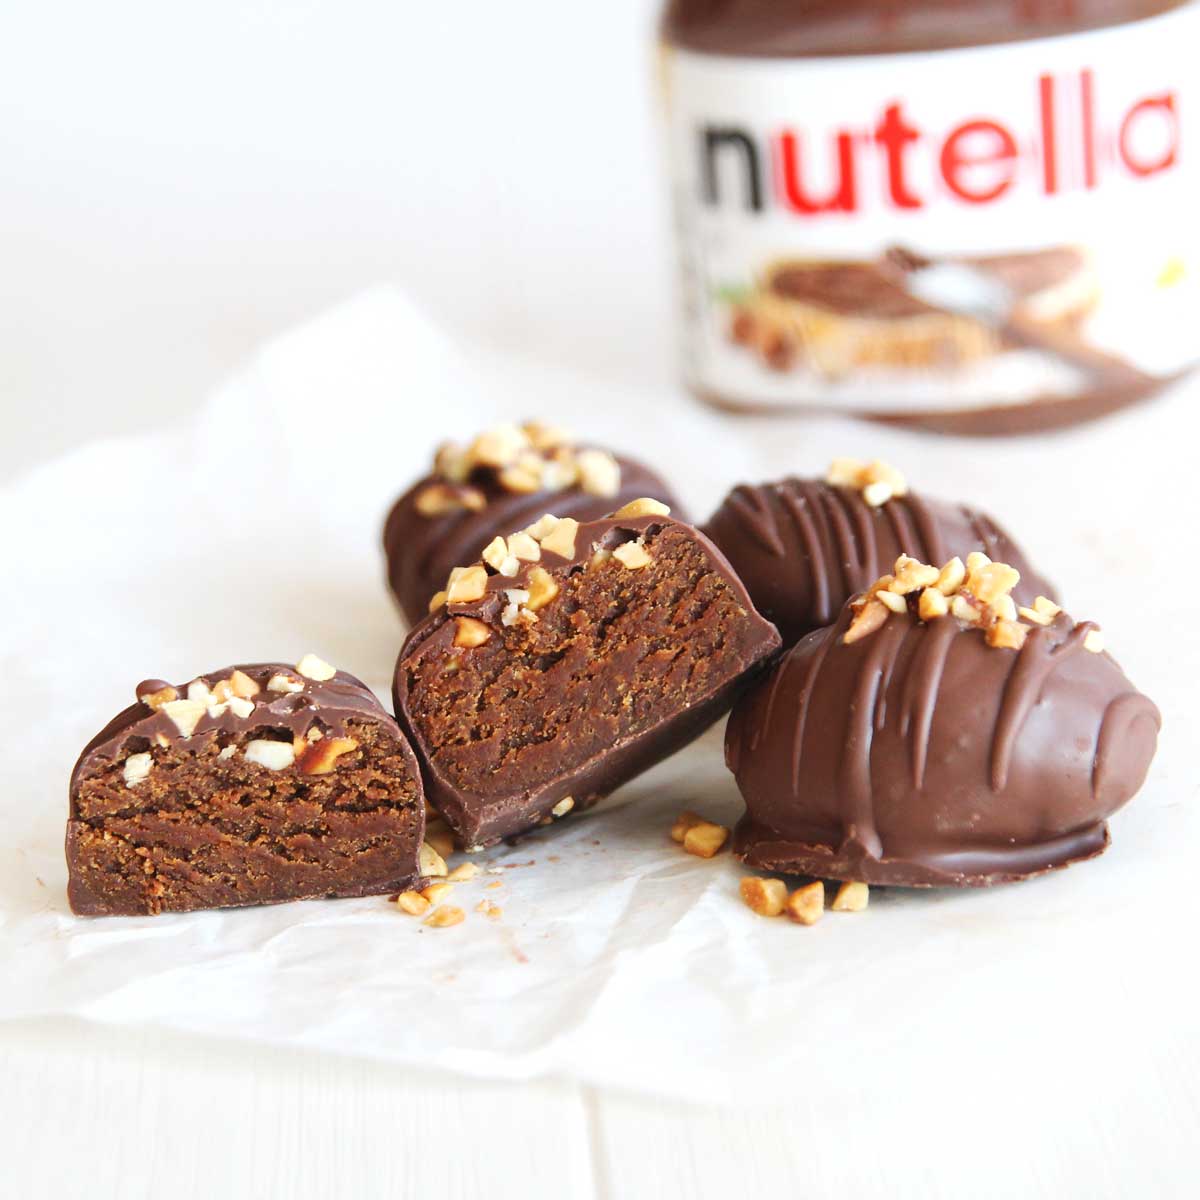 Healthier Nutella Chocolate Easter Eggs Made with PB Powder - white bean paste cookies